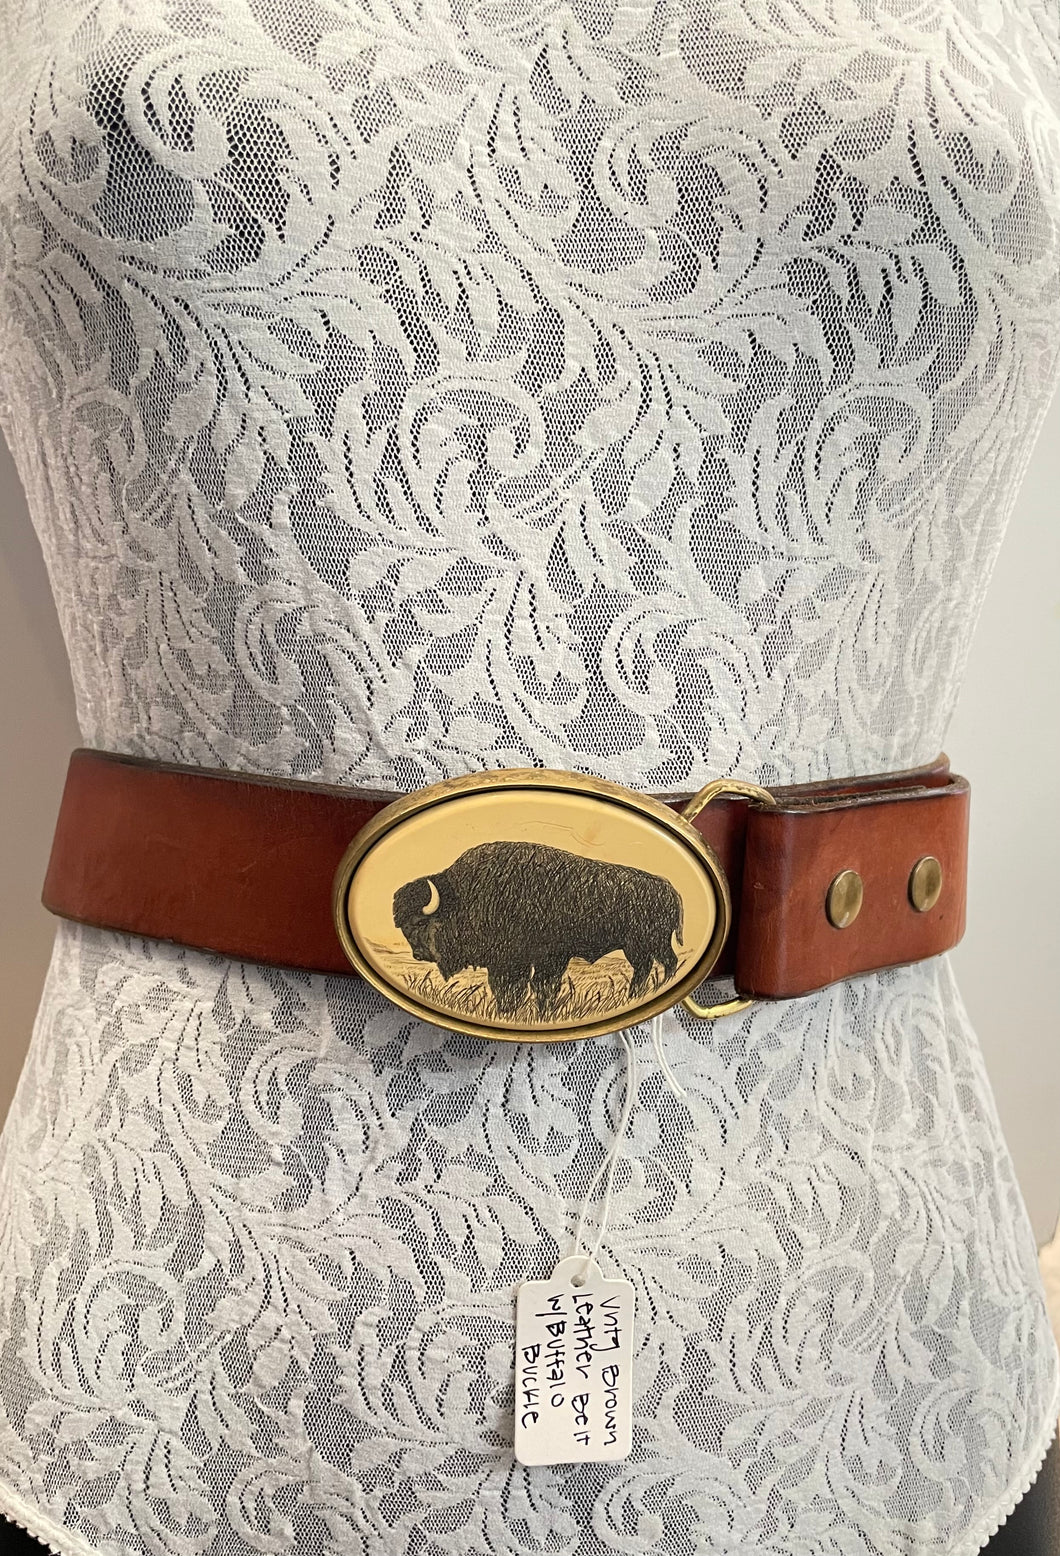 Vintage Barlow brown leather belt with Buffalo motif buckle